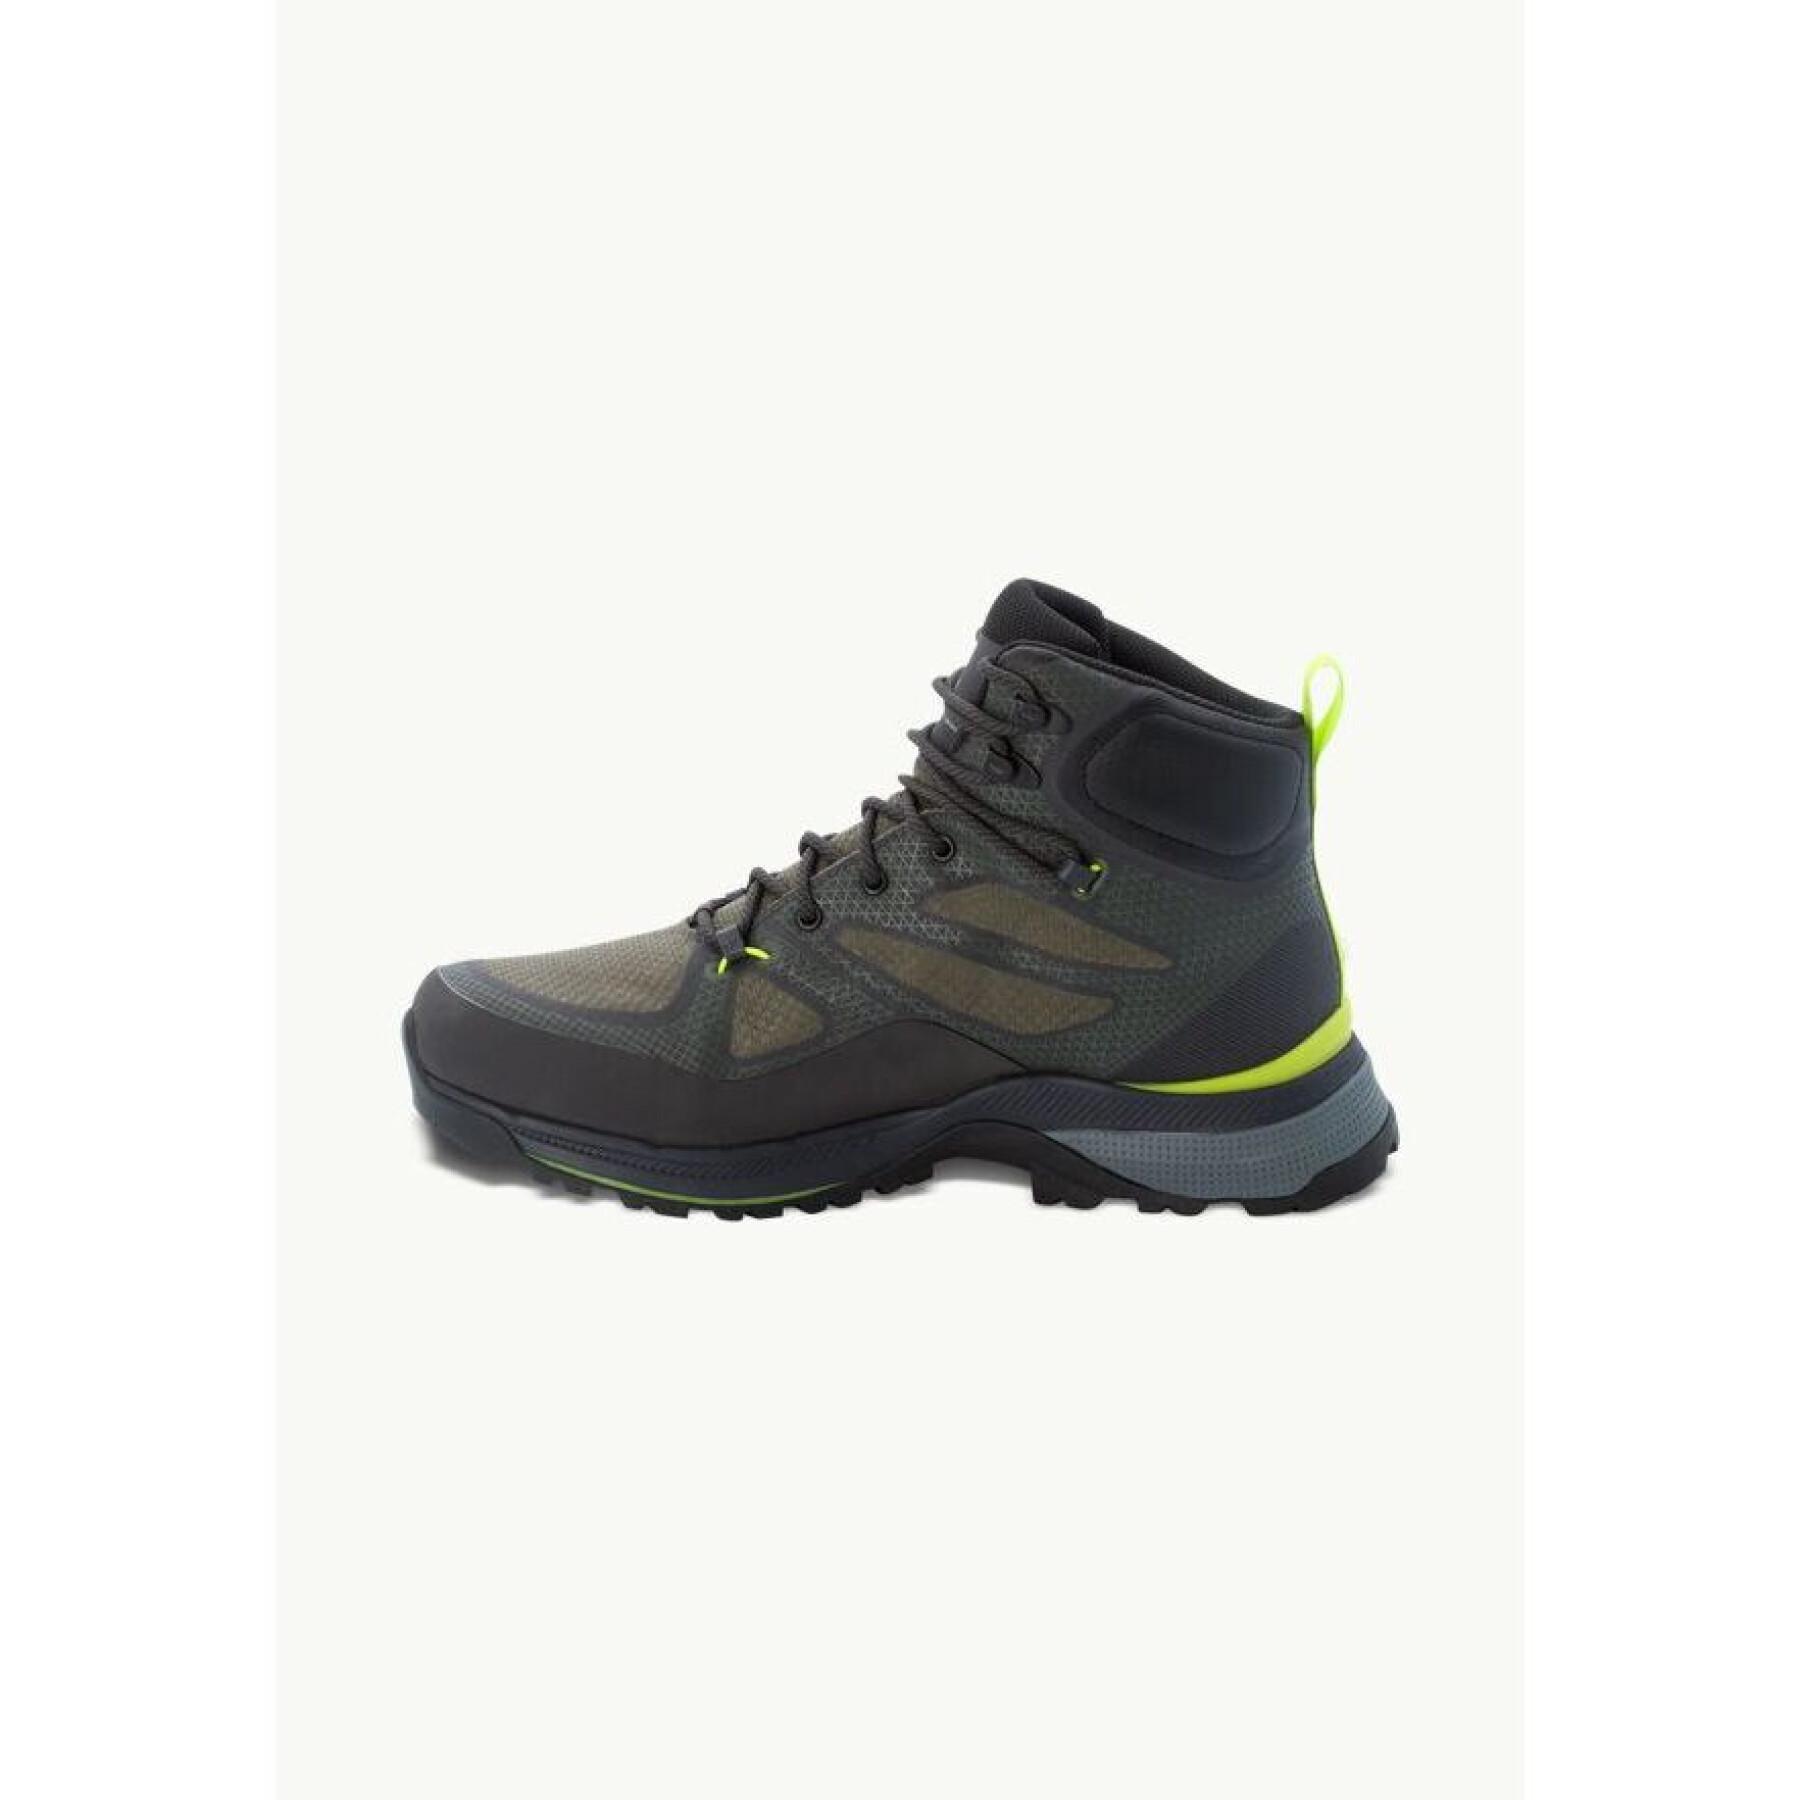 Mid-height hiking boots Jack Wolfskin Force striker Texapore